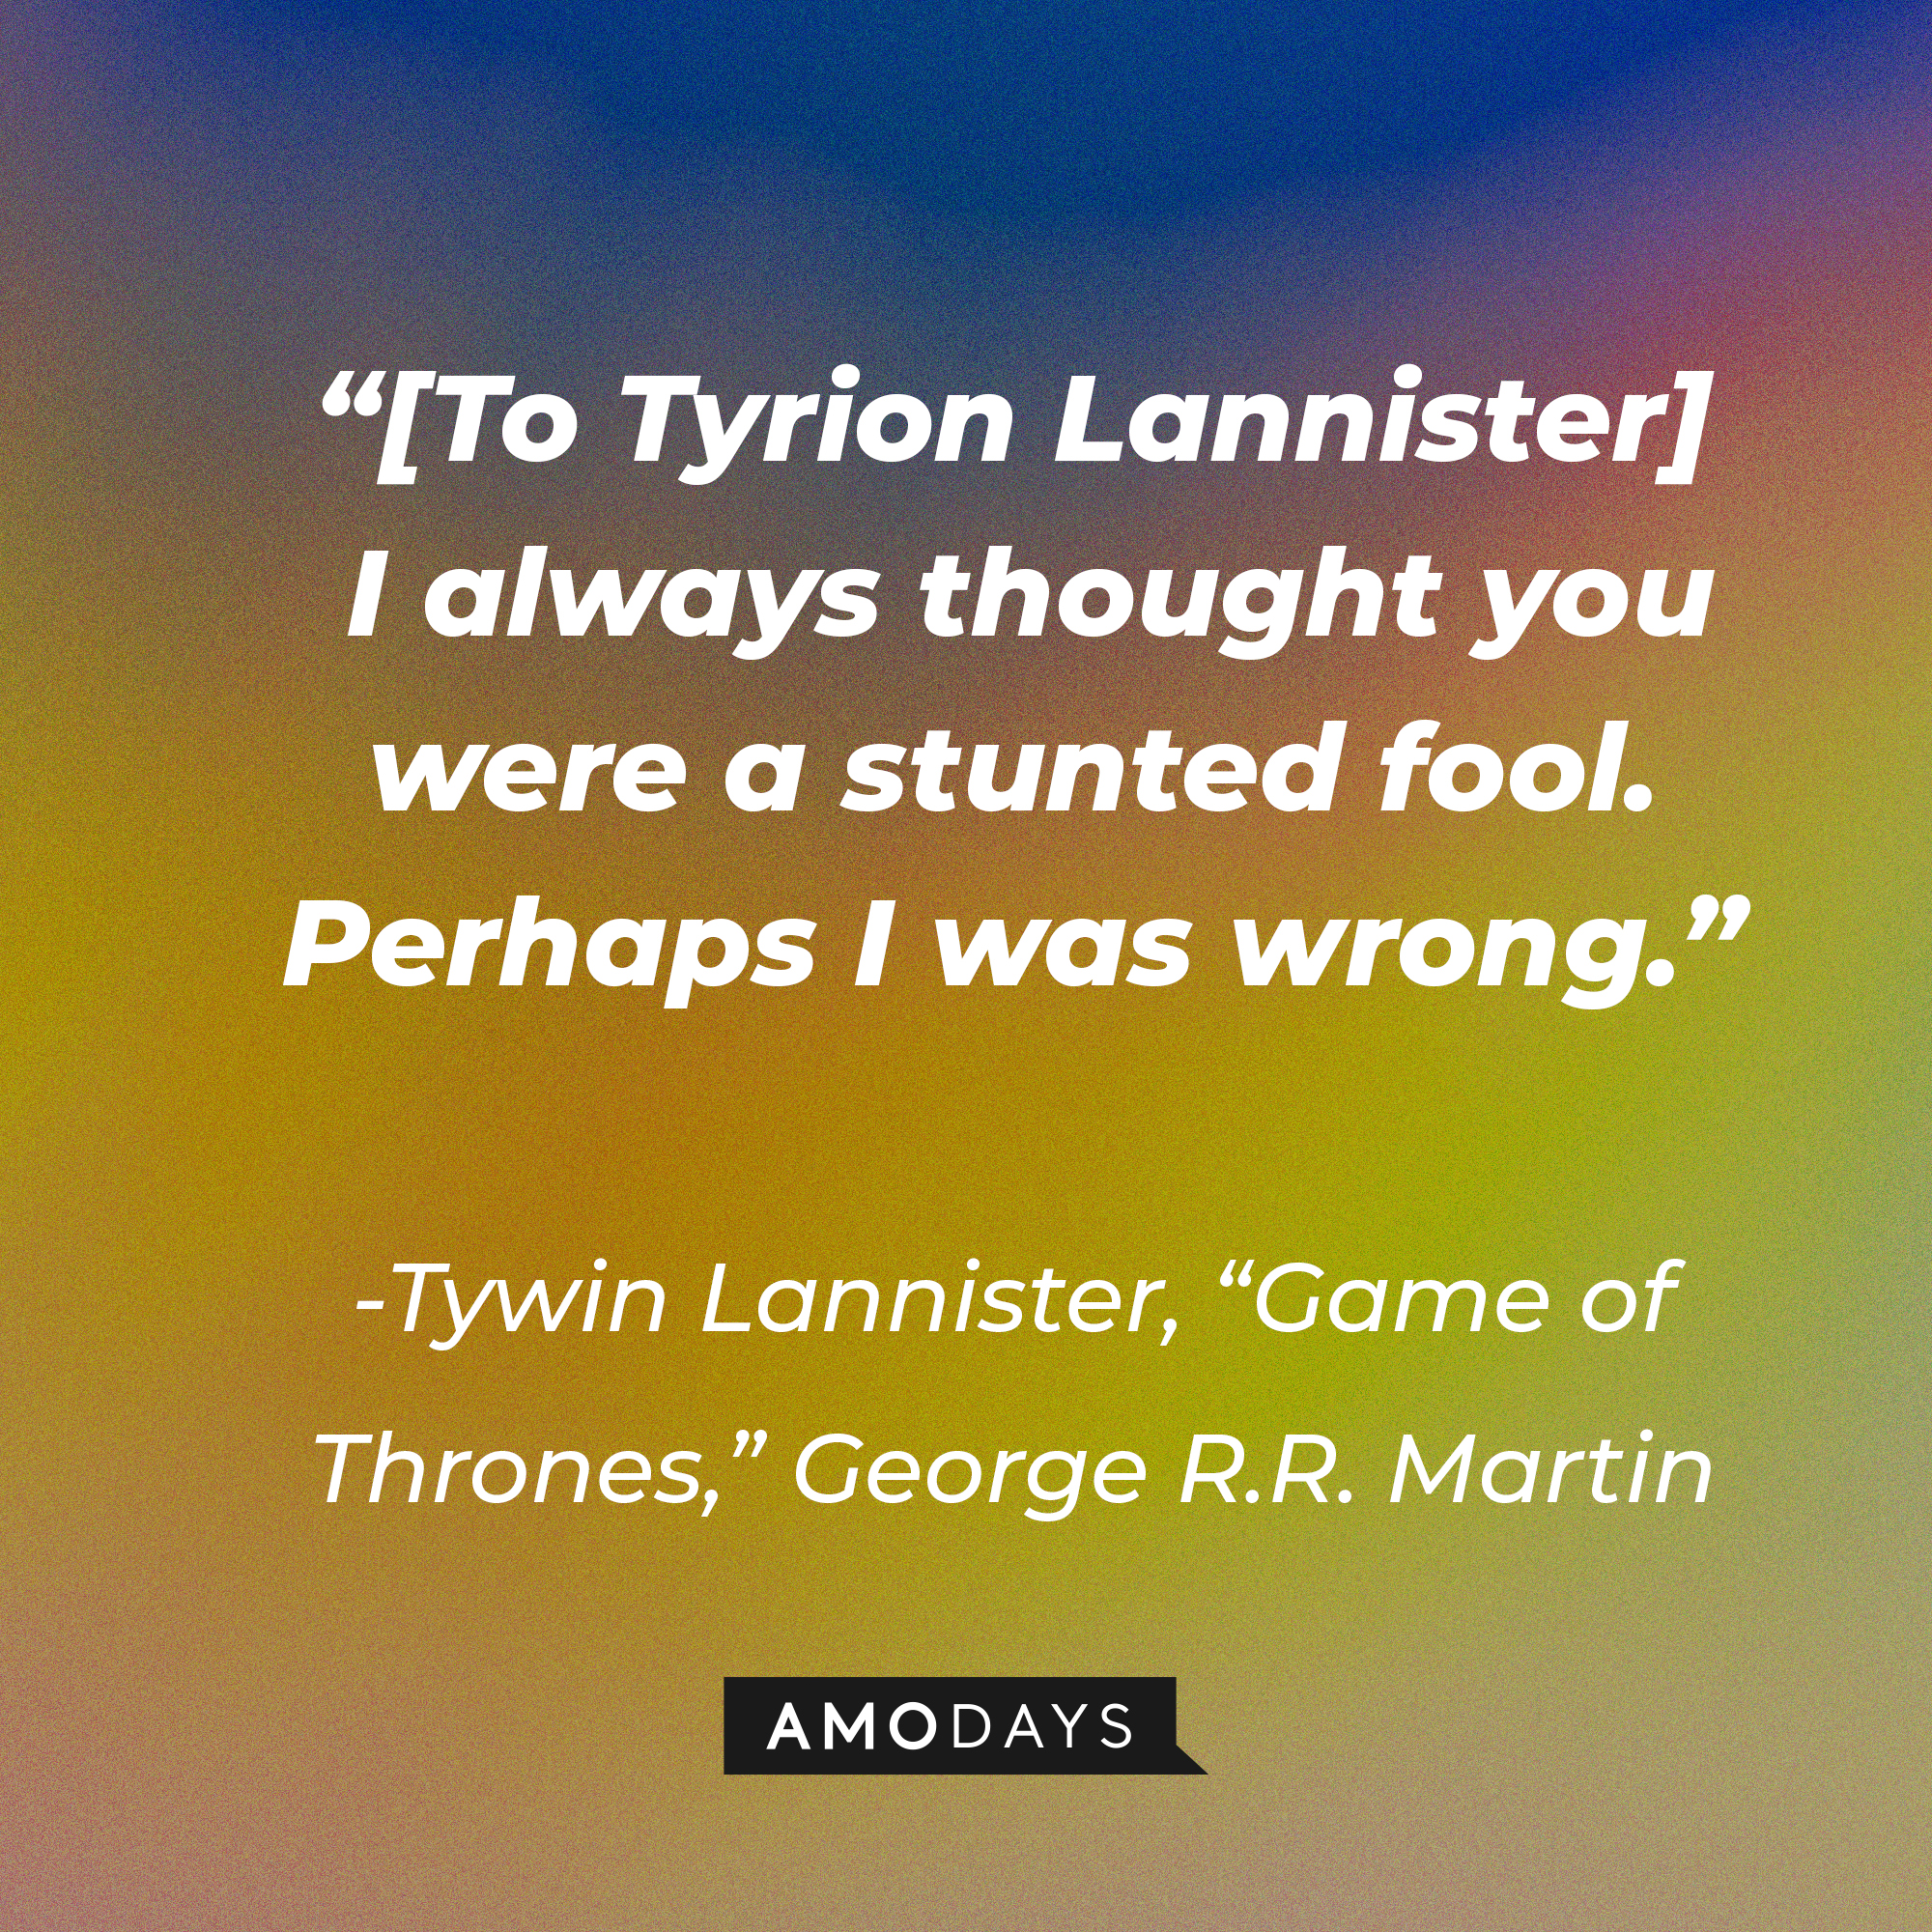 Tywin Lannister’s quote from George R.R. Martin's "Game of Thrones": “[To Tyrion Lannister] I always thought you were a stunted fool. Perhaps I was wrong.” | Source: AmoDays